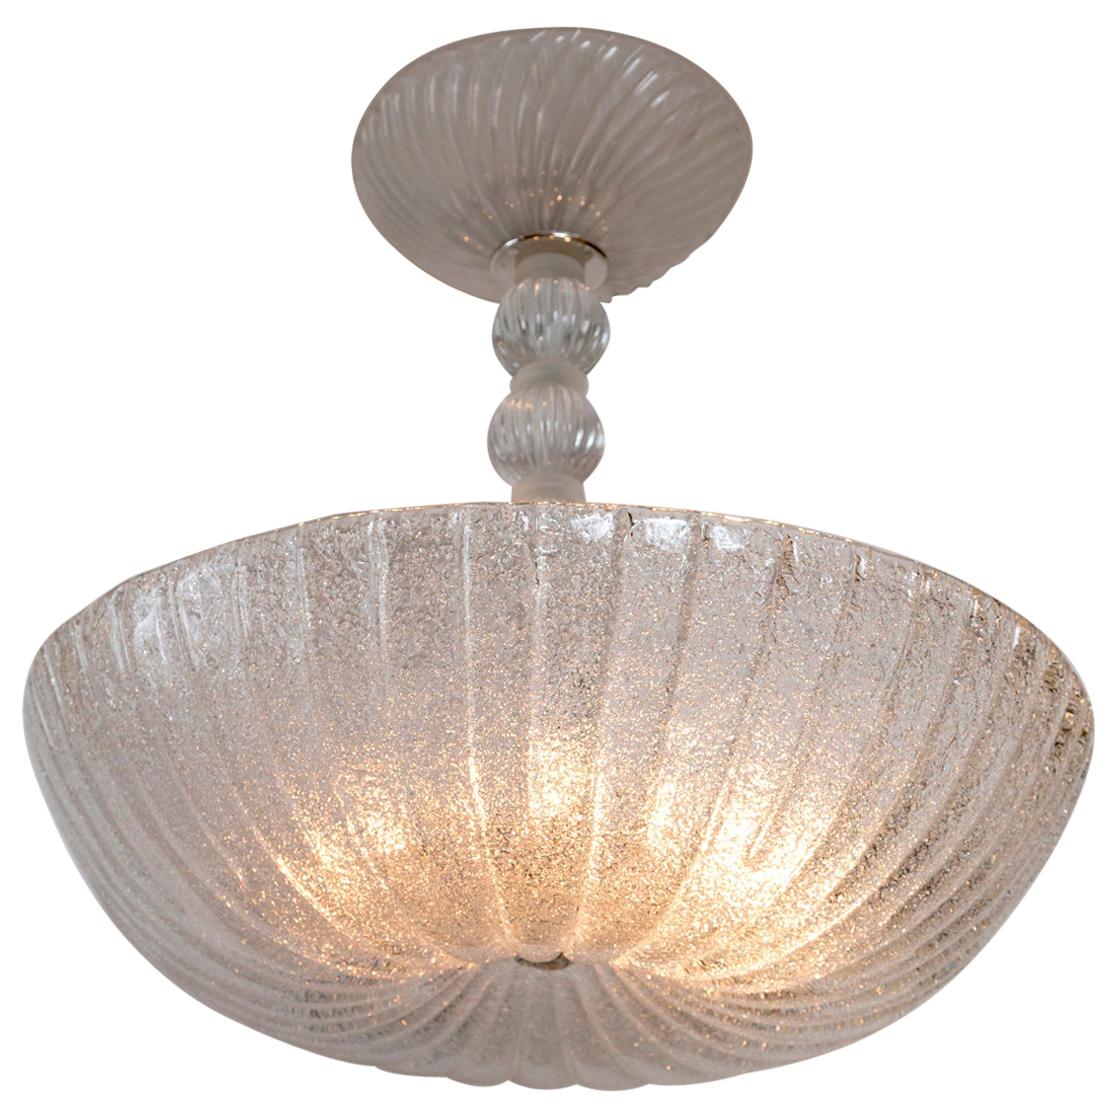 Frosted Murano Dome-Shaped Pendant Ceiling Fixture, Contemporary